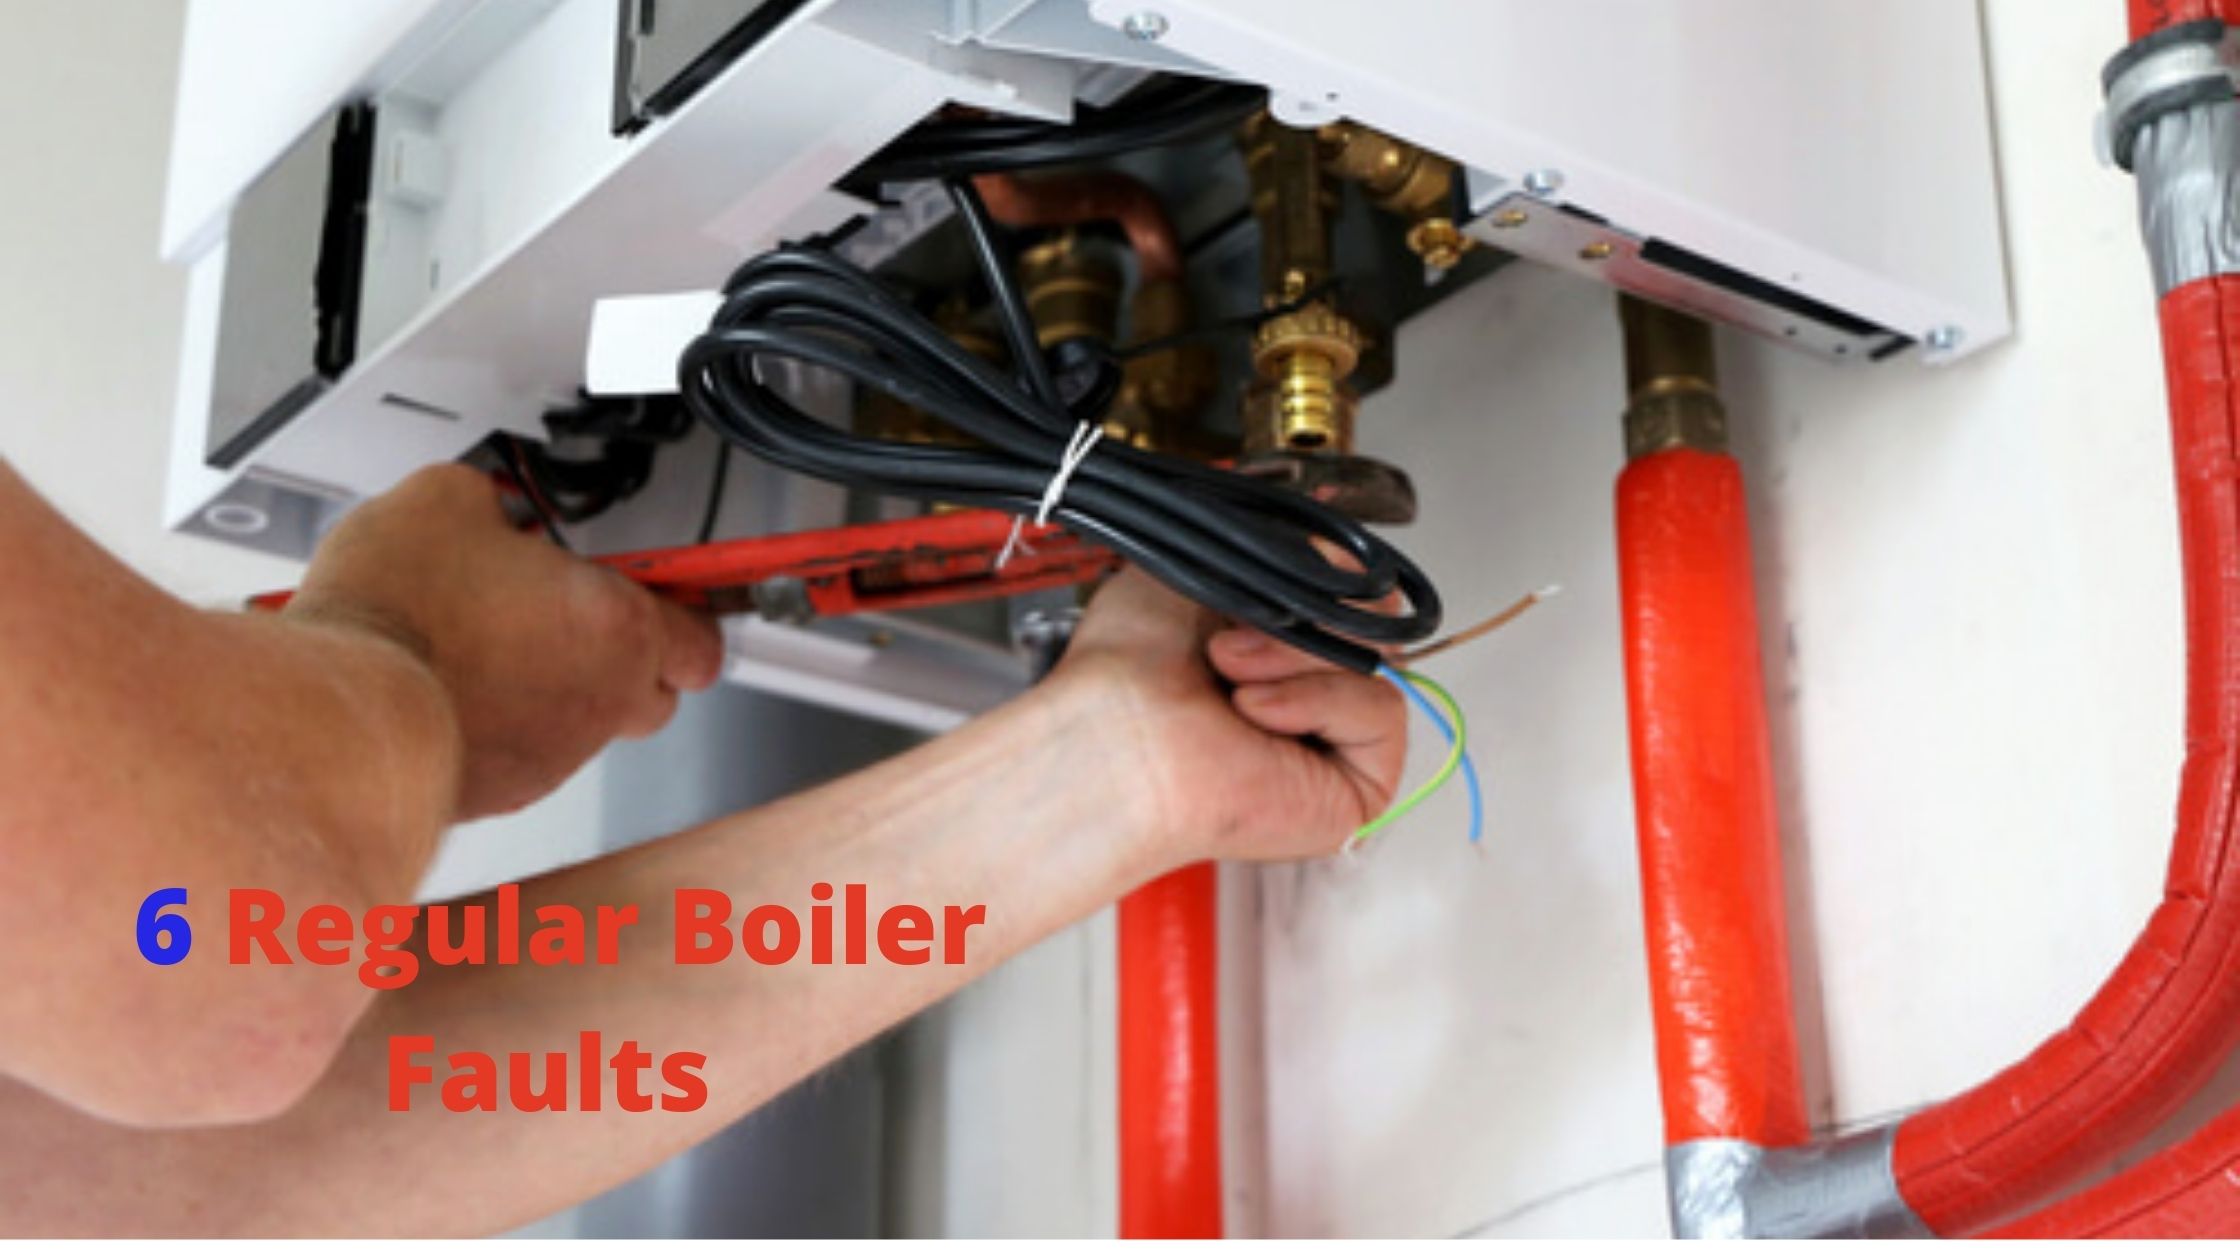 contact 4D heating and plumbing for boiler repair services in london.